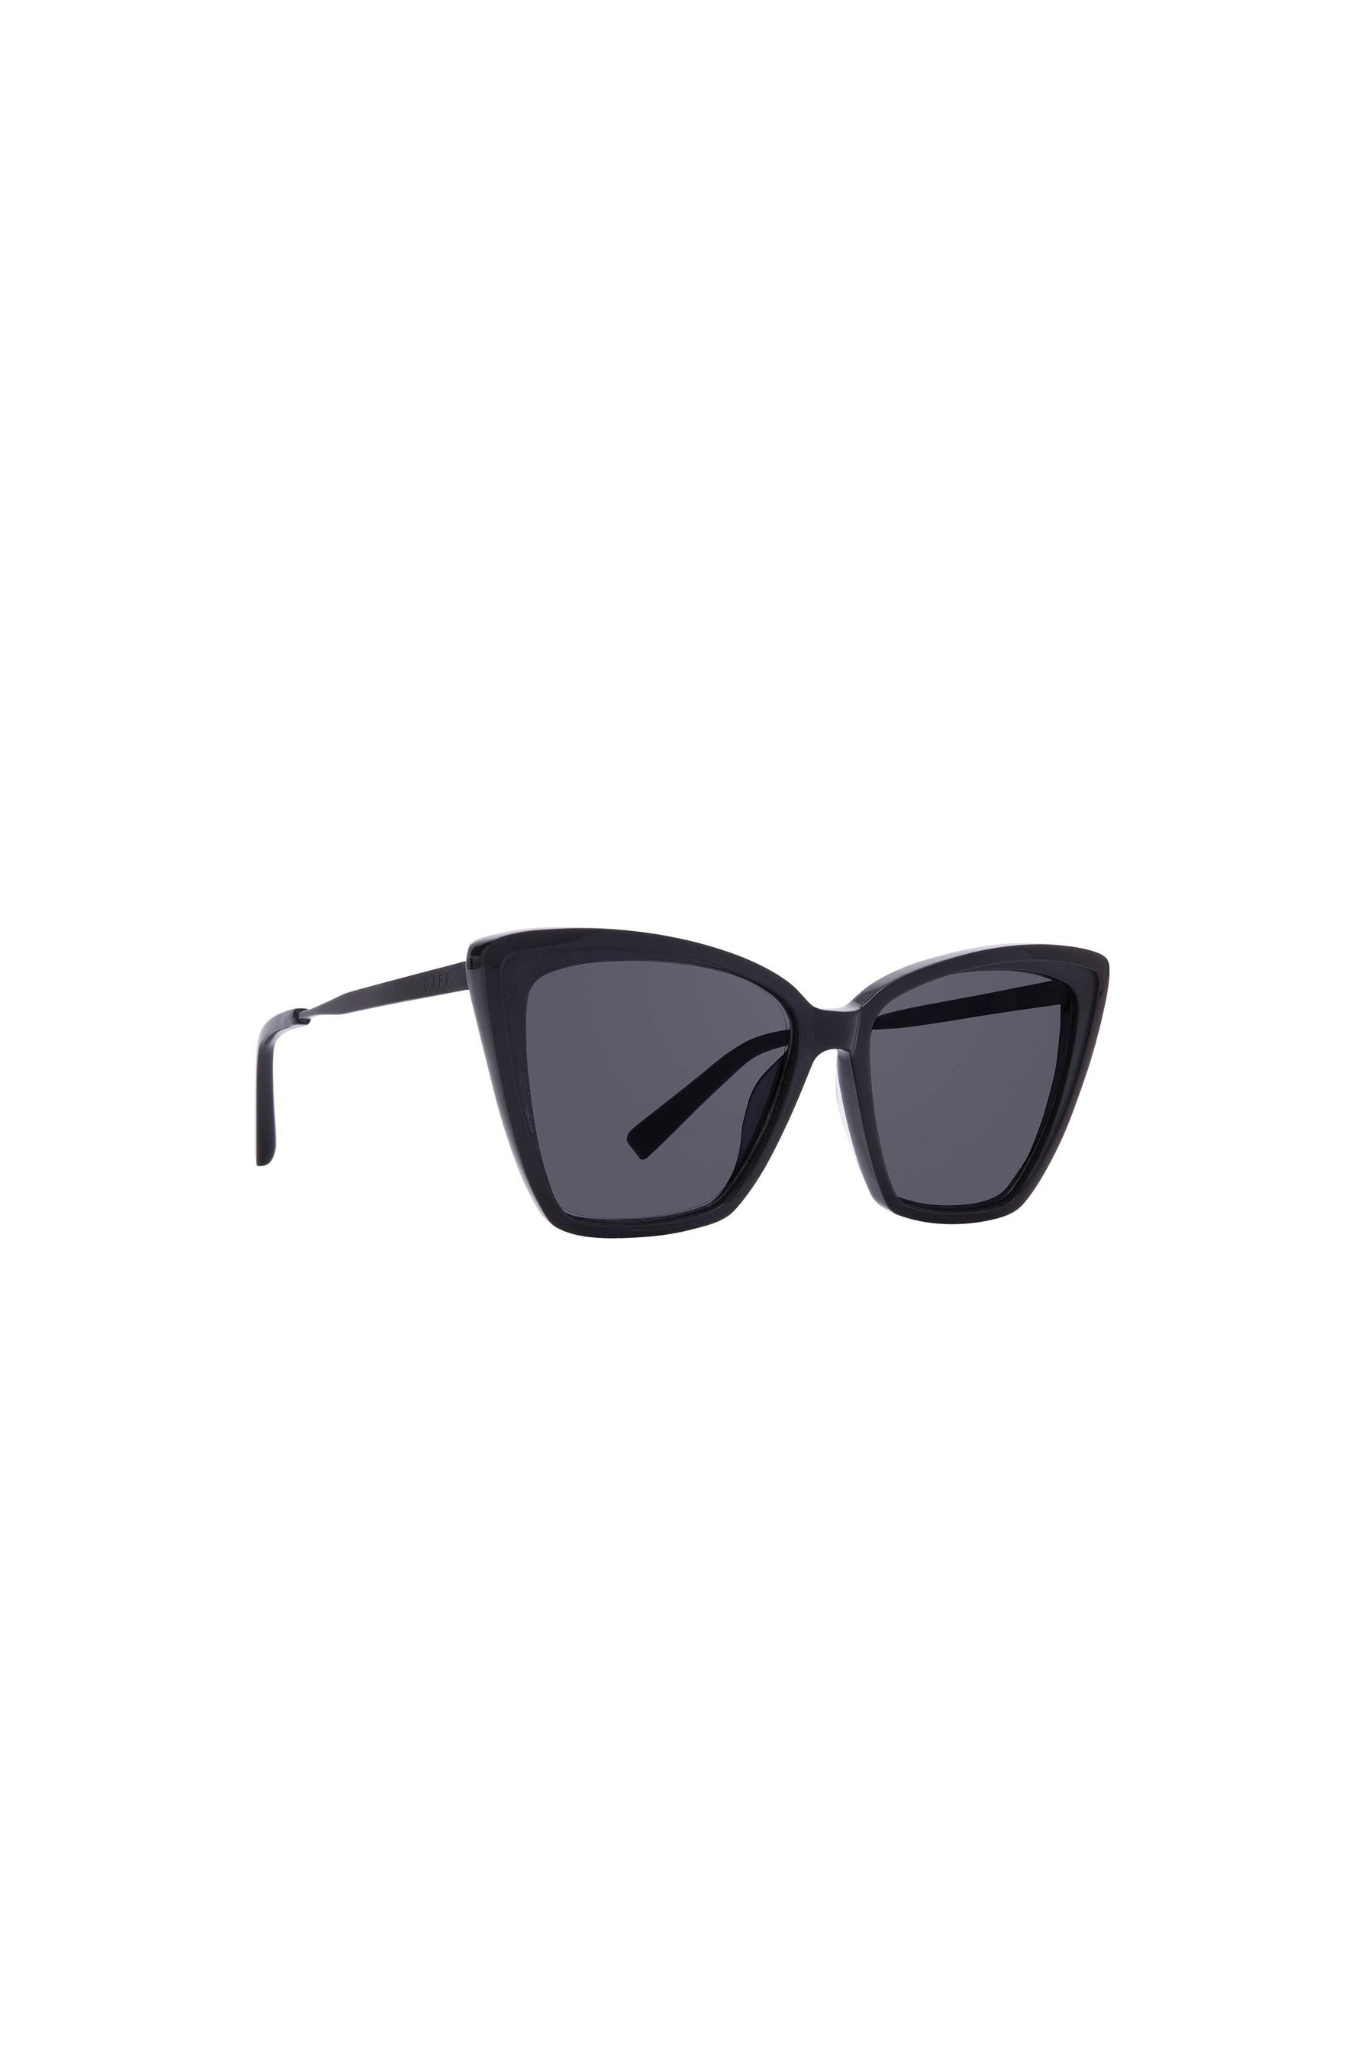 DIFF | Becky II Sunglasses - Black | Sweetest Stitch Online Boutique